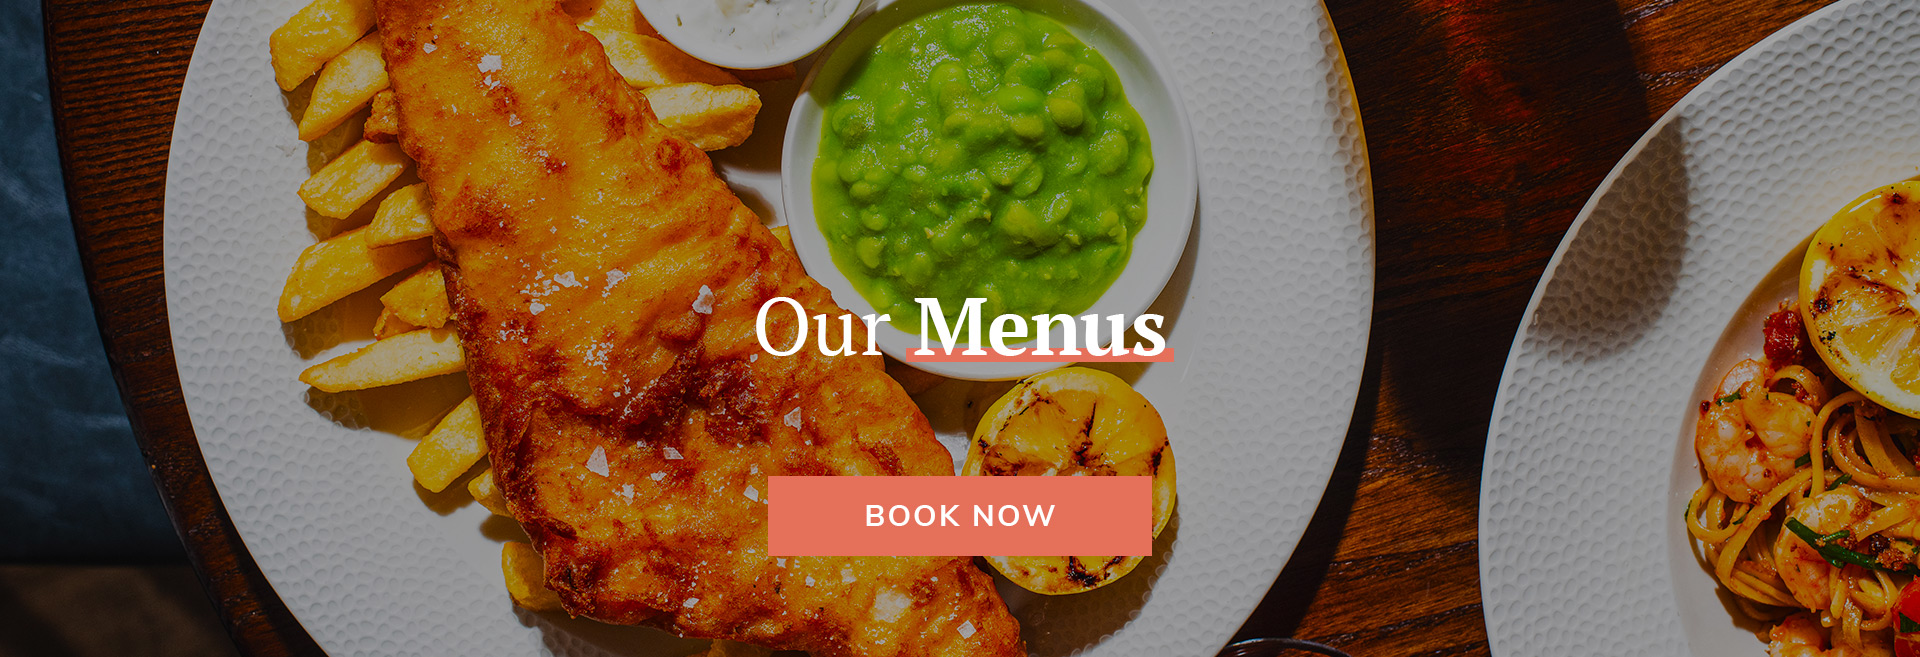 Book Now at The Drummond